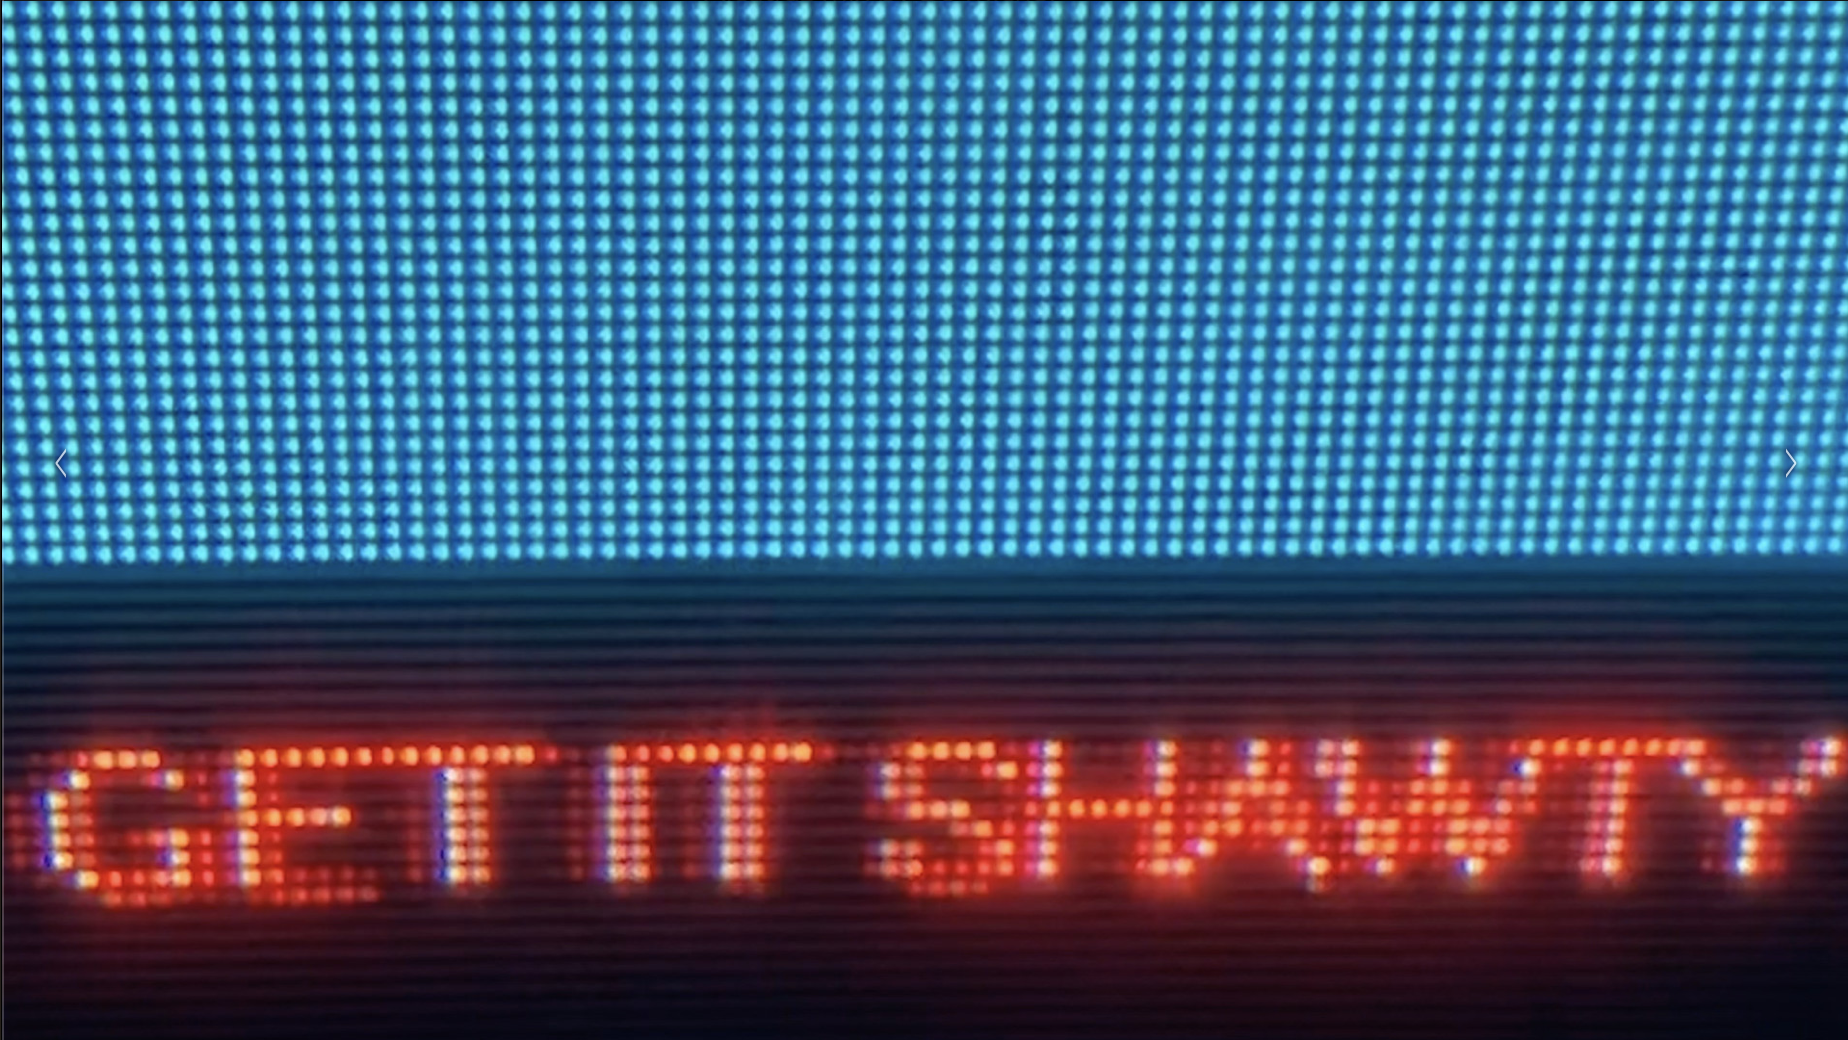 A close up of an electronic sign billboard that says "Get it Shawty" in red lights against a black background, and below blue lights